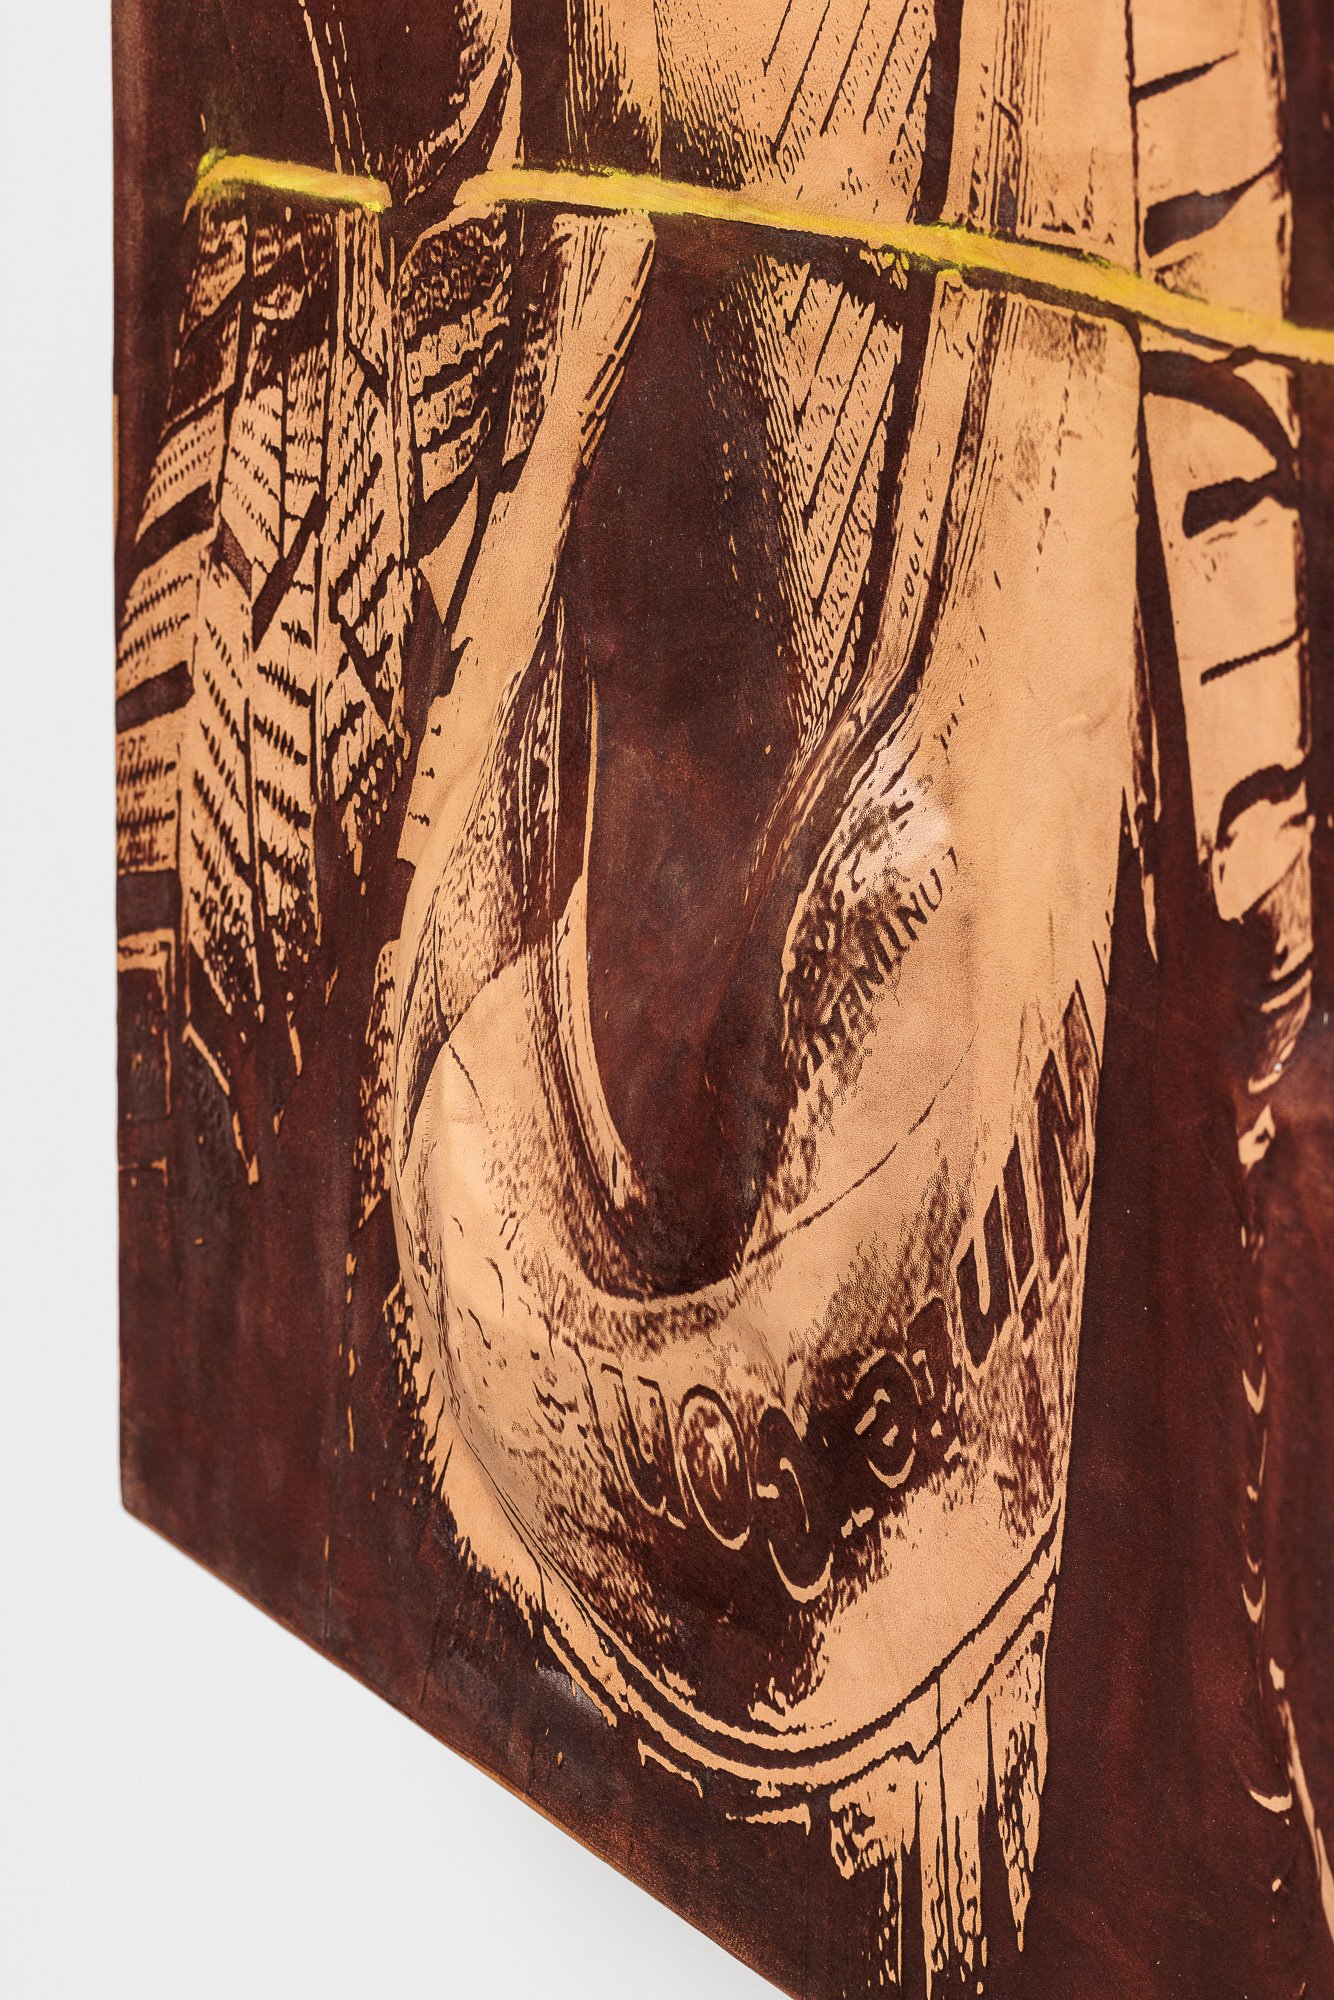 Lena HenkeLena Henke, Combustions 23 [Sidewall failure], 2024Laser etched leather, pigment on wooden panel150 x 125 x 15 cm